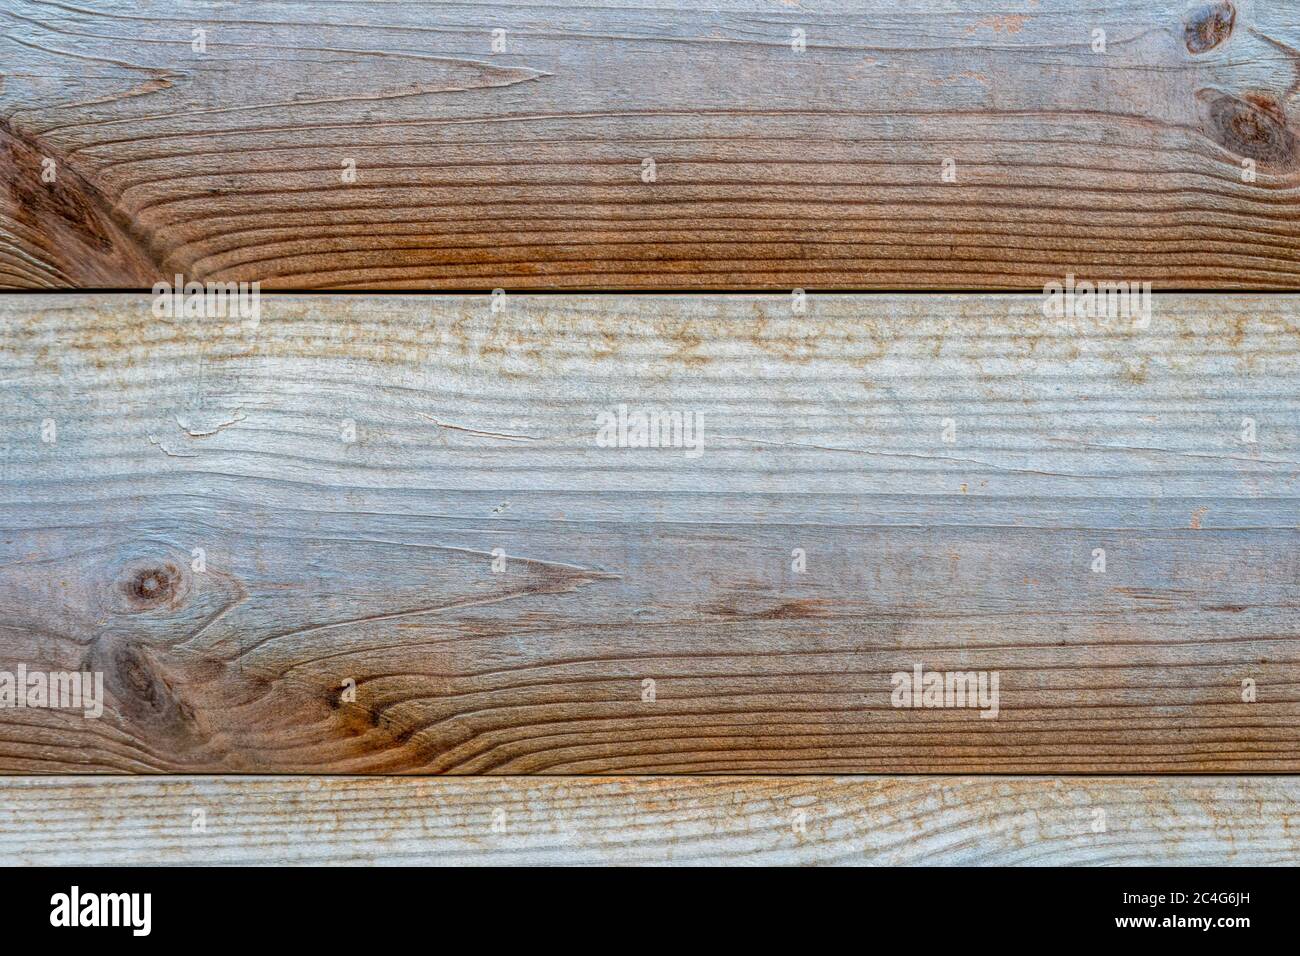 horizontal pine wood planks texture. abstract nature background with surface wooden pattern panels. free space for add picture and illustration for Stock Photo